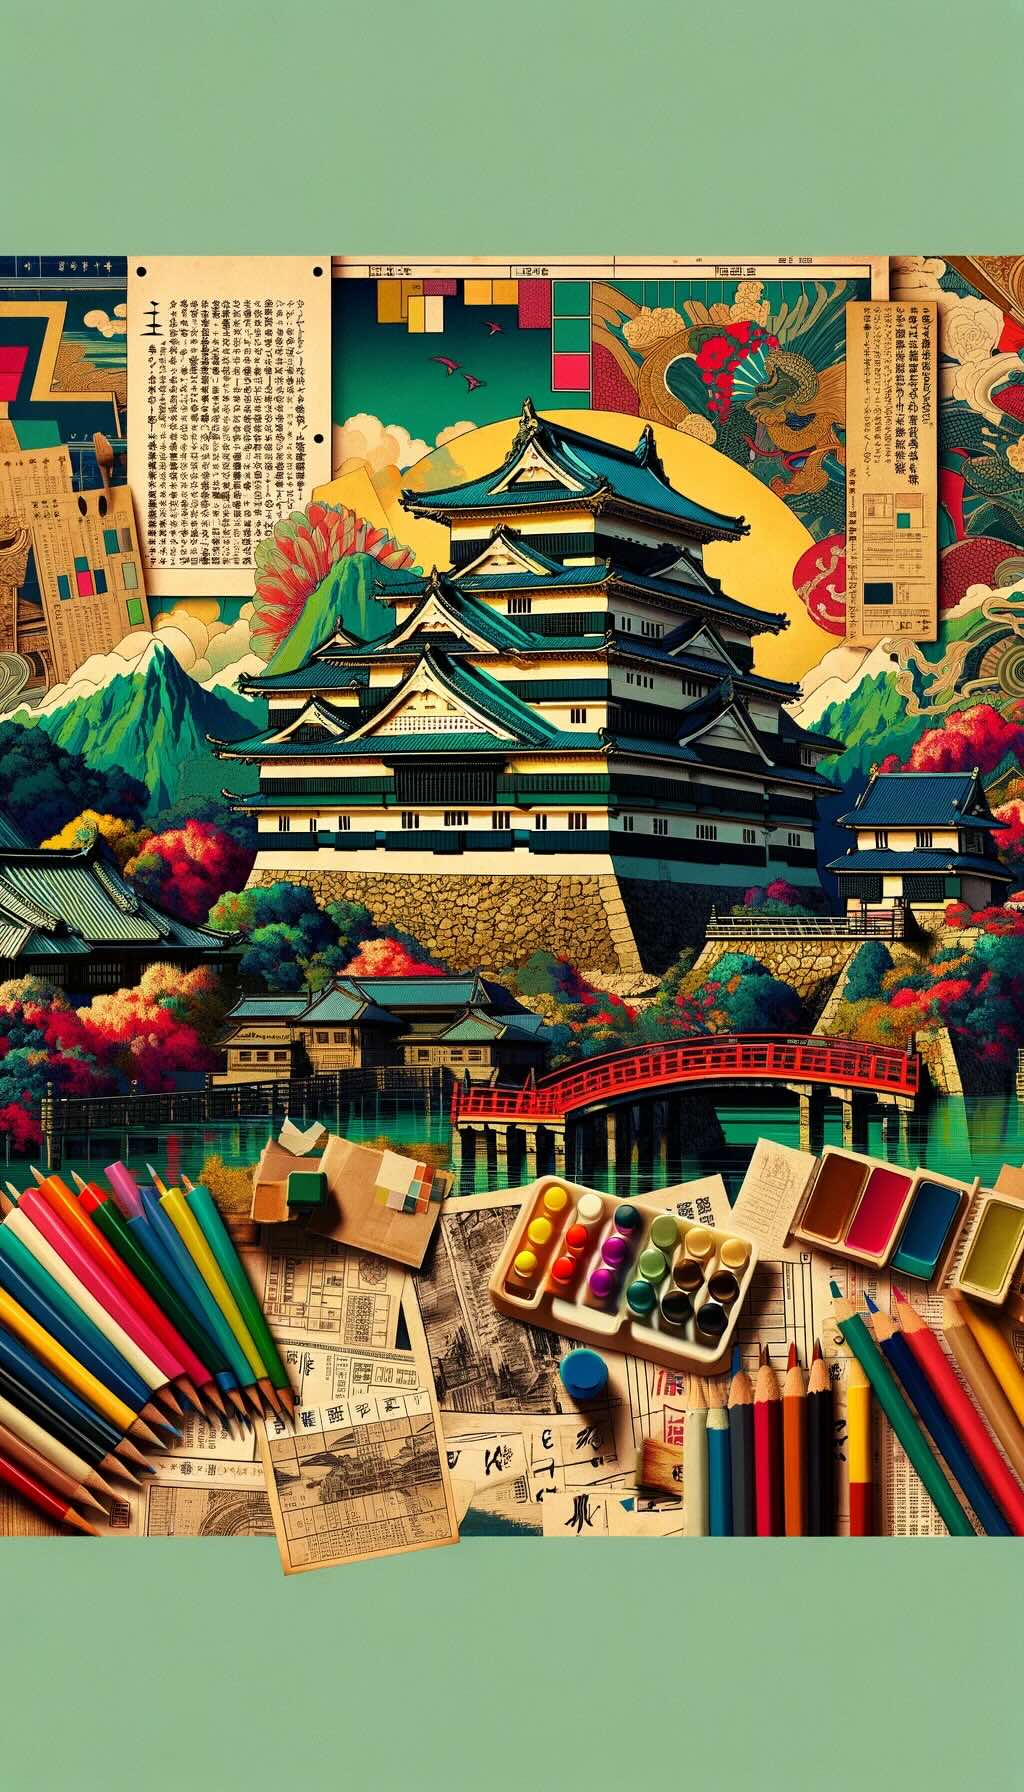 Capturing the influence of samurai culture and warfare on the design of Japanese castles highlights the strategic and aesthetic considerations that shaped these iconic structures, embodying the samurai's values and architectural ingenuity. 